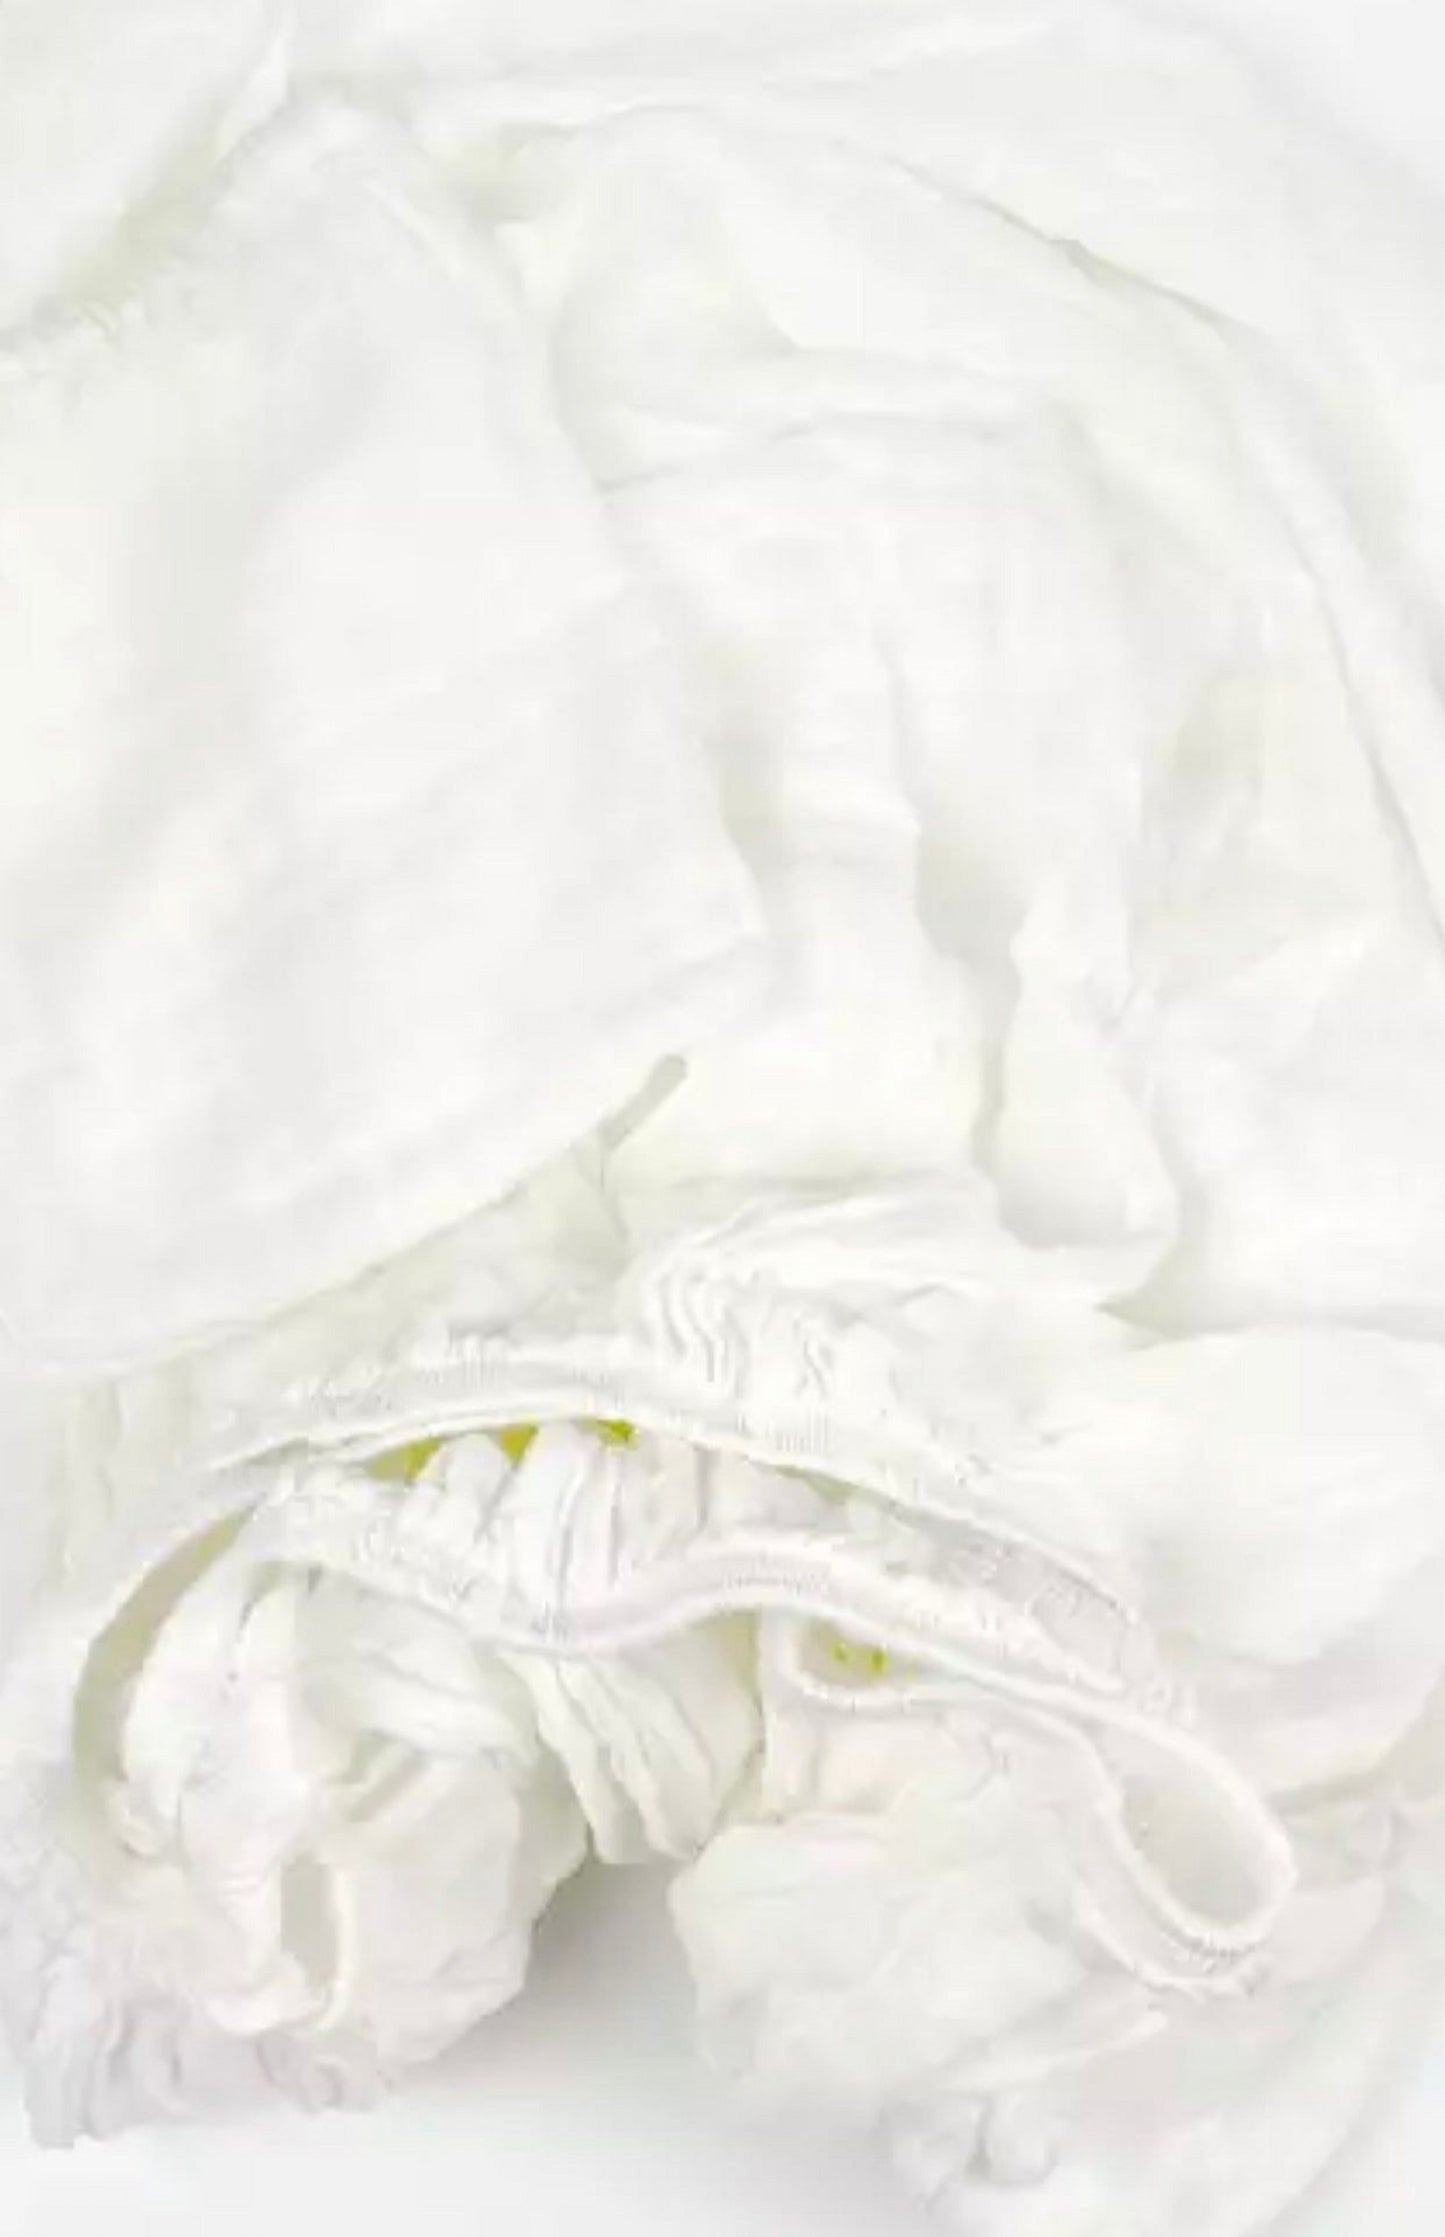 Bamboo Muslin Fitted Crib Sheet - White Simple